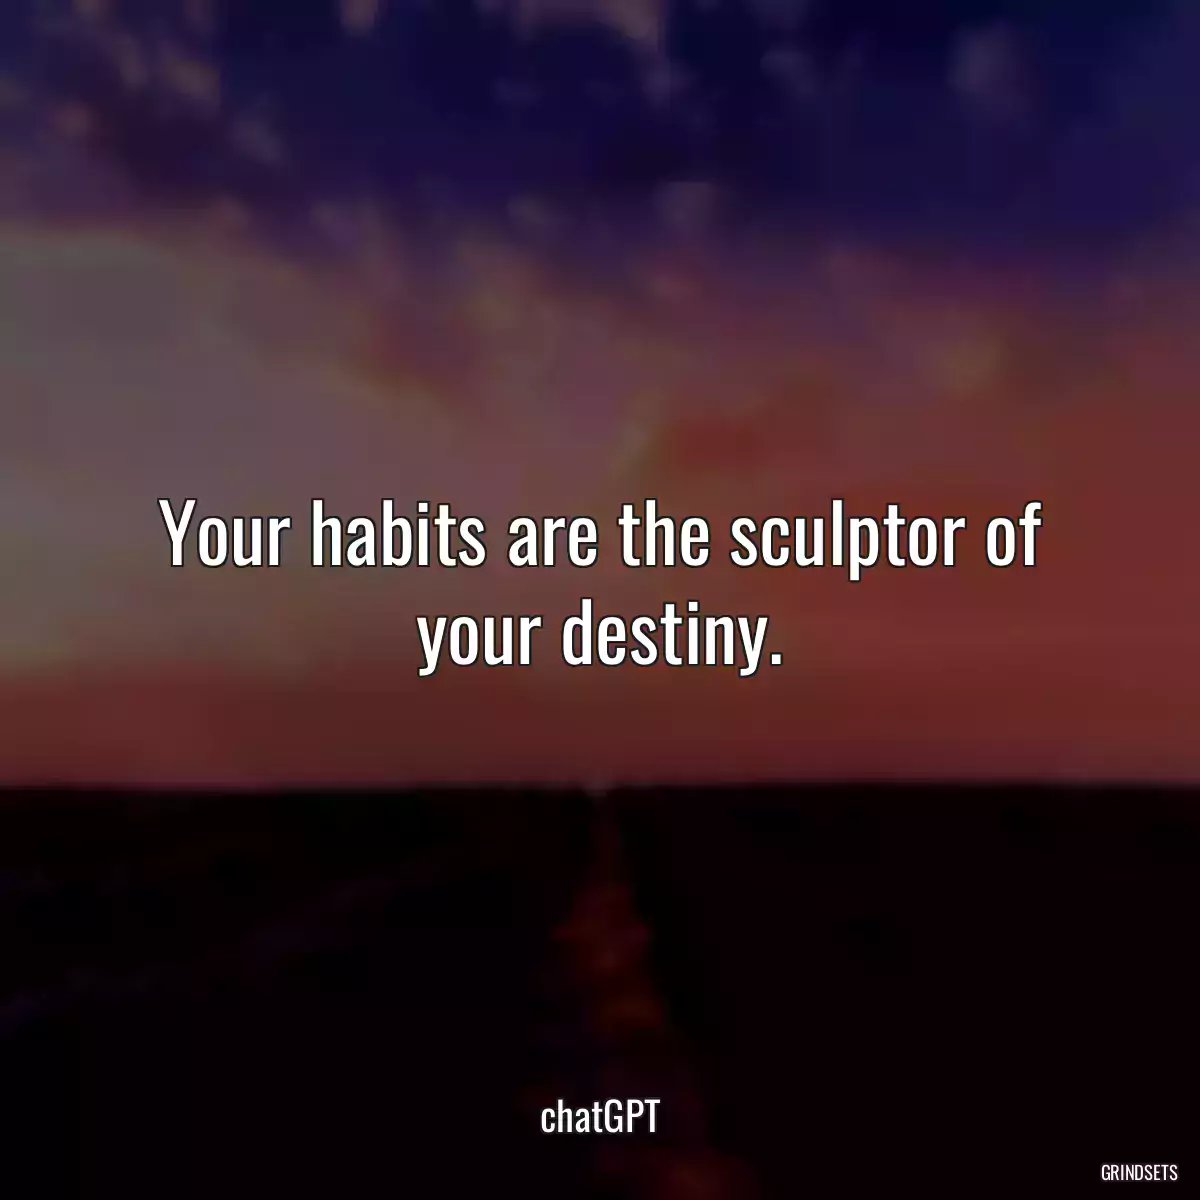 Your habits are the sculptor of your destiny.